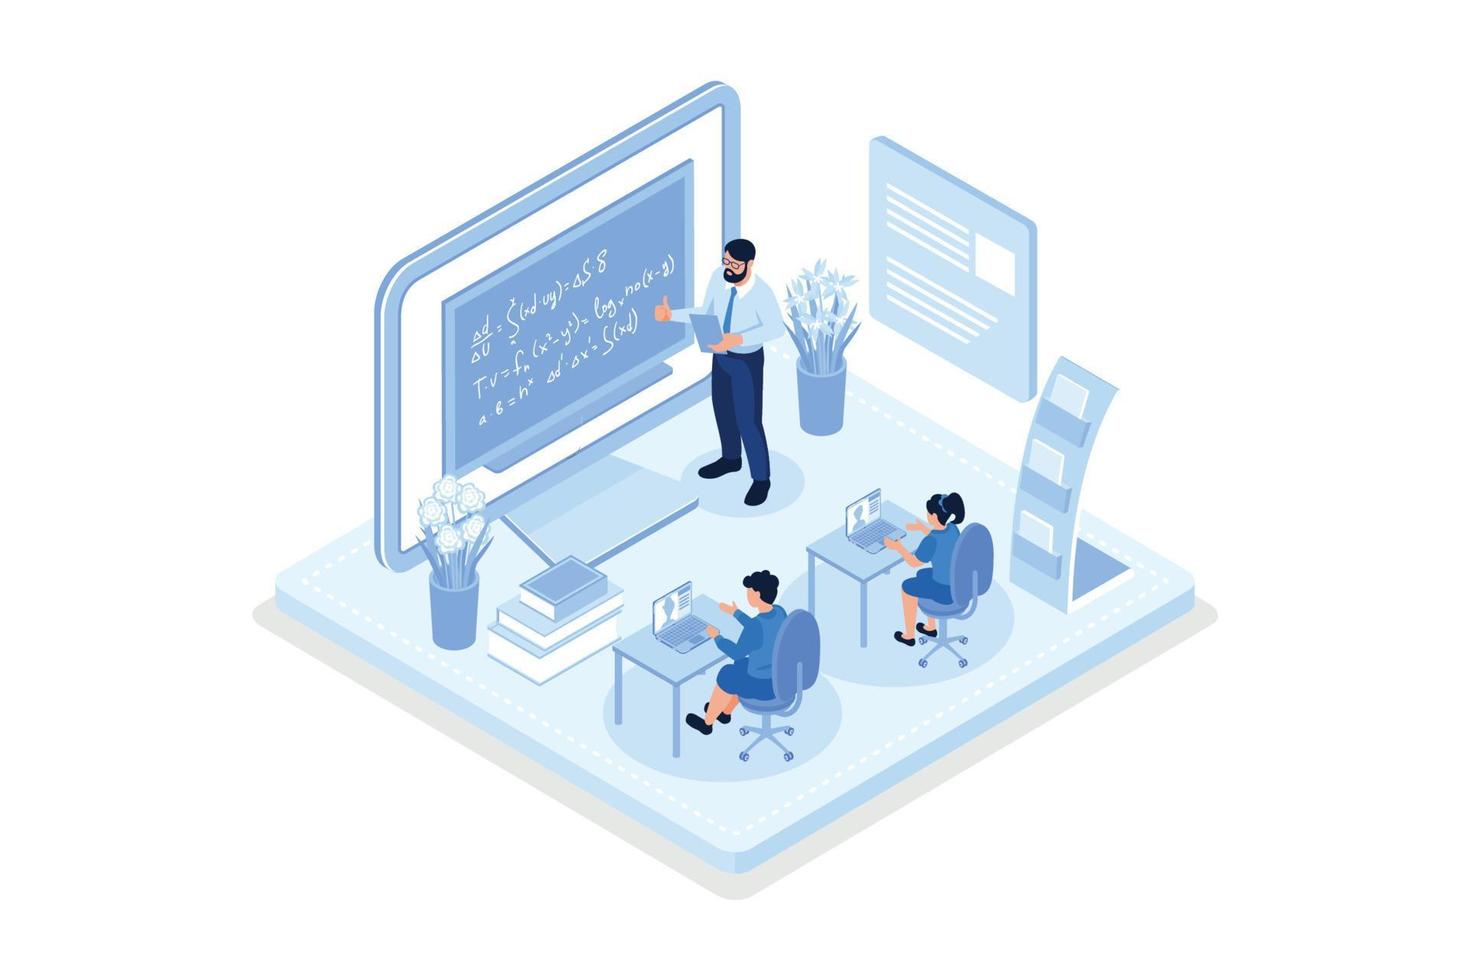 Student Learning Online at Home. Character Sitting at Desk, Looking at Laptop and Studying with Exercise Books. Teacher Help him. Online Education Concept, isometric flat vector modern illustration